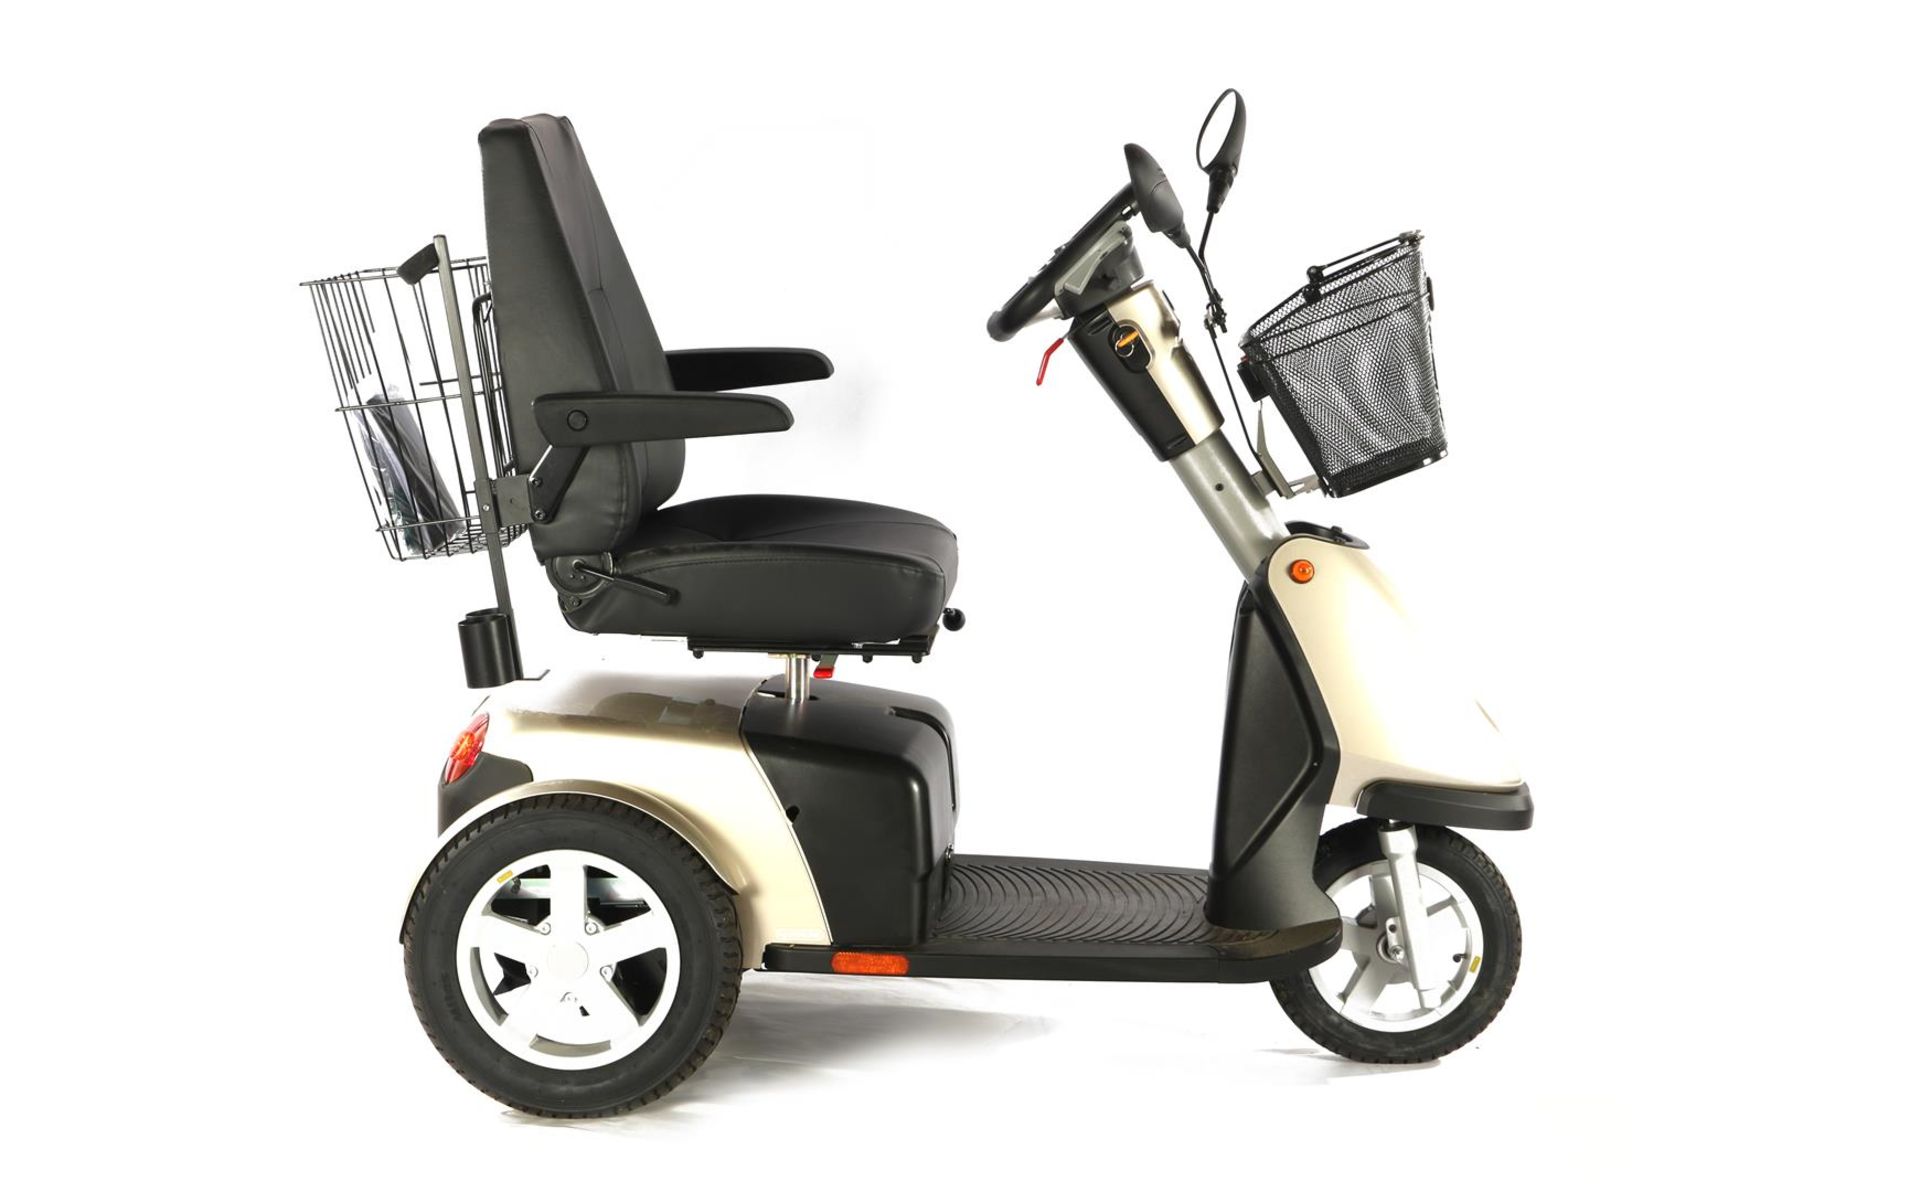 As good as new scooter Sterling Trophy 6, 3 wheel, champagne color, January 2020, purchase price